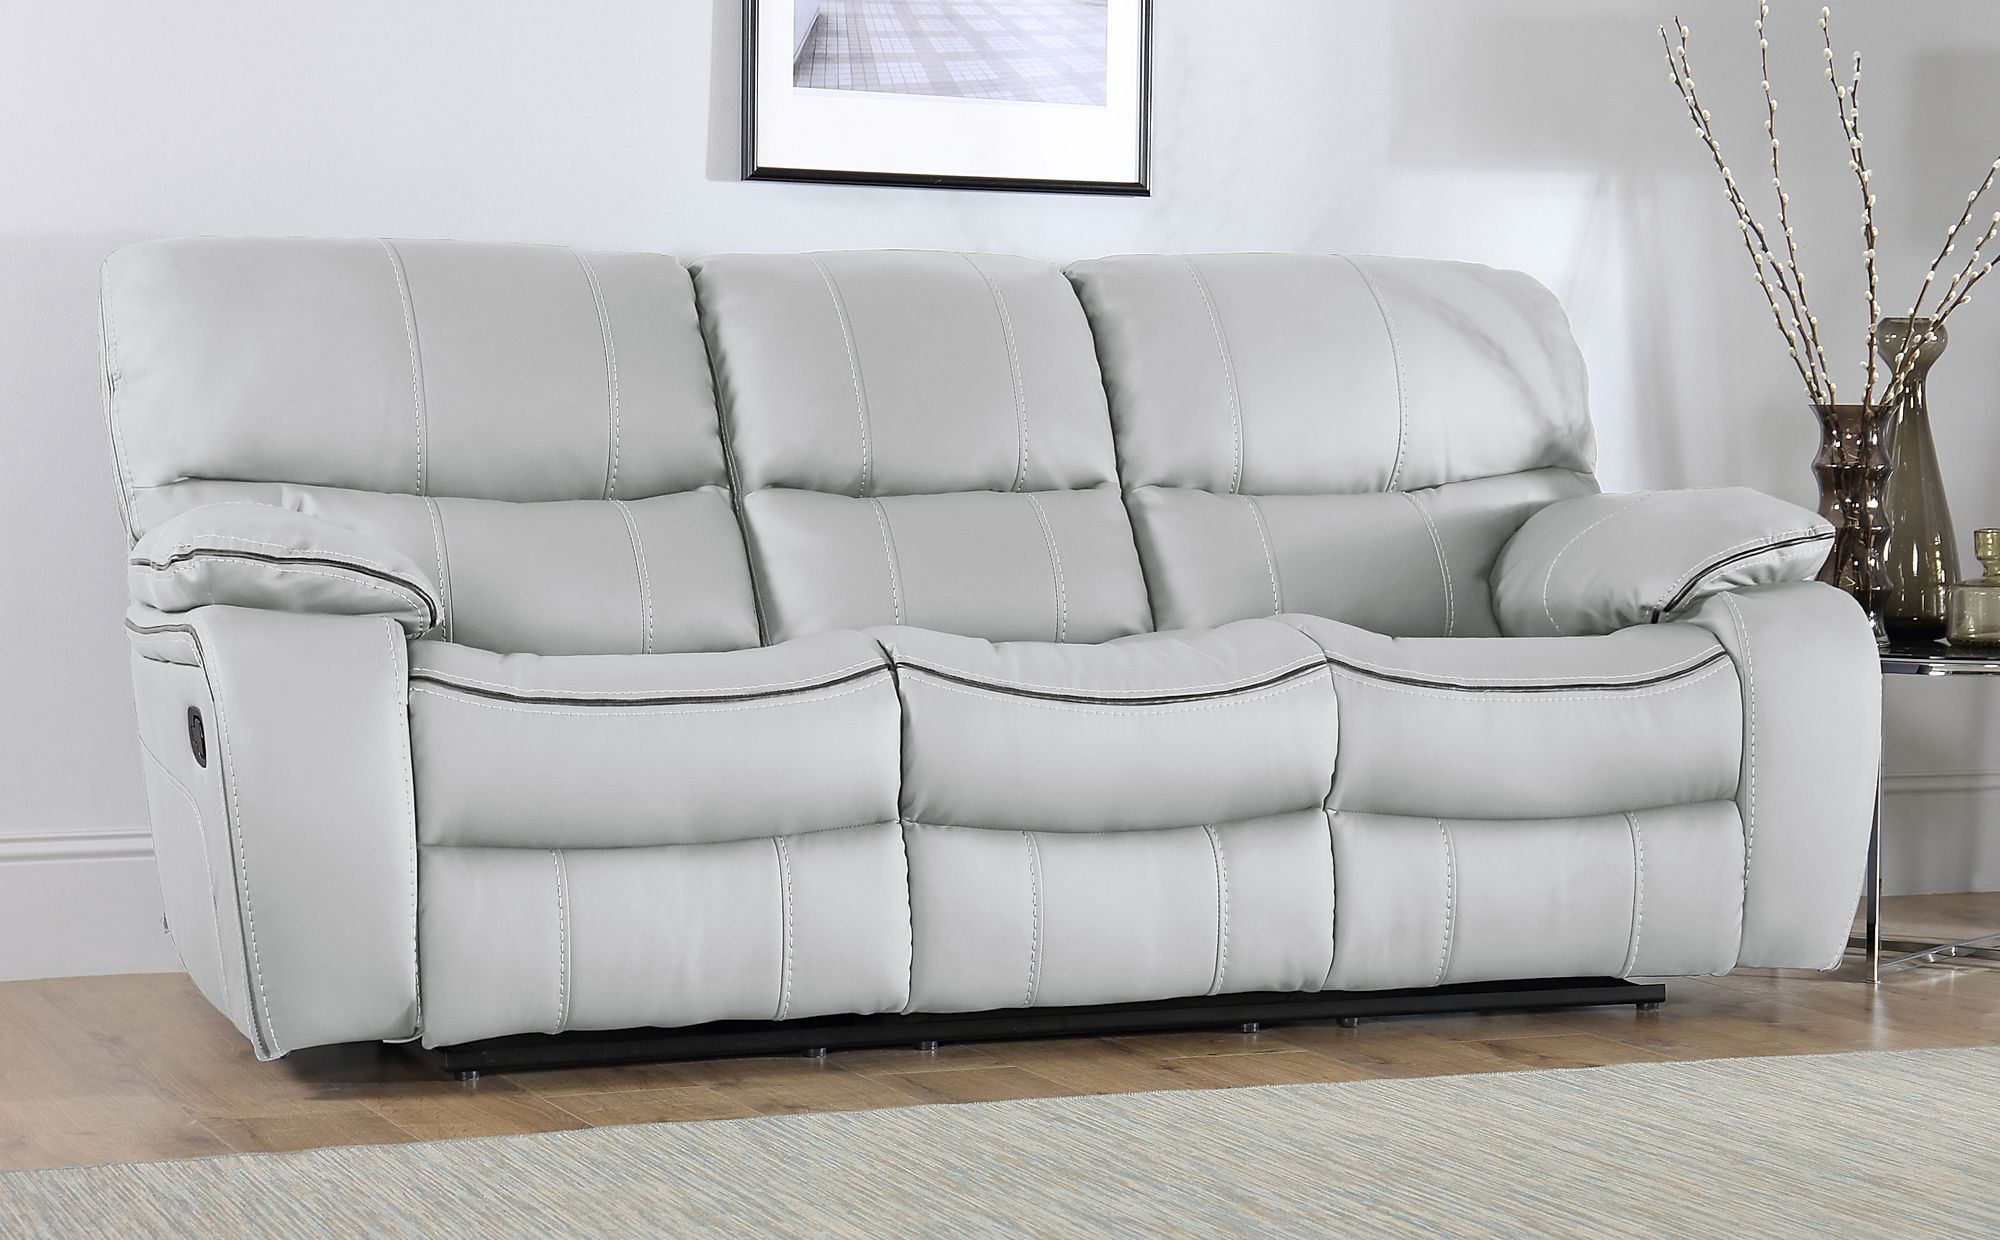 Beaumont Light Grey Leather 3 Seater Recliner Sofa | Furniture Choice Pertaining To Sofas In Light Grey (View 16 of 20)